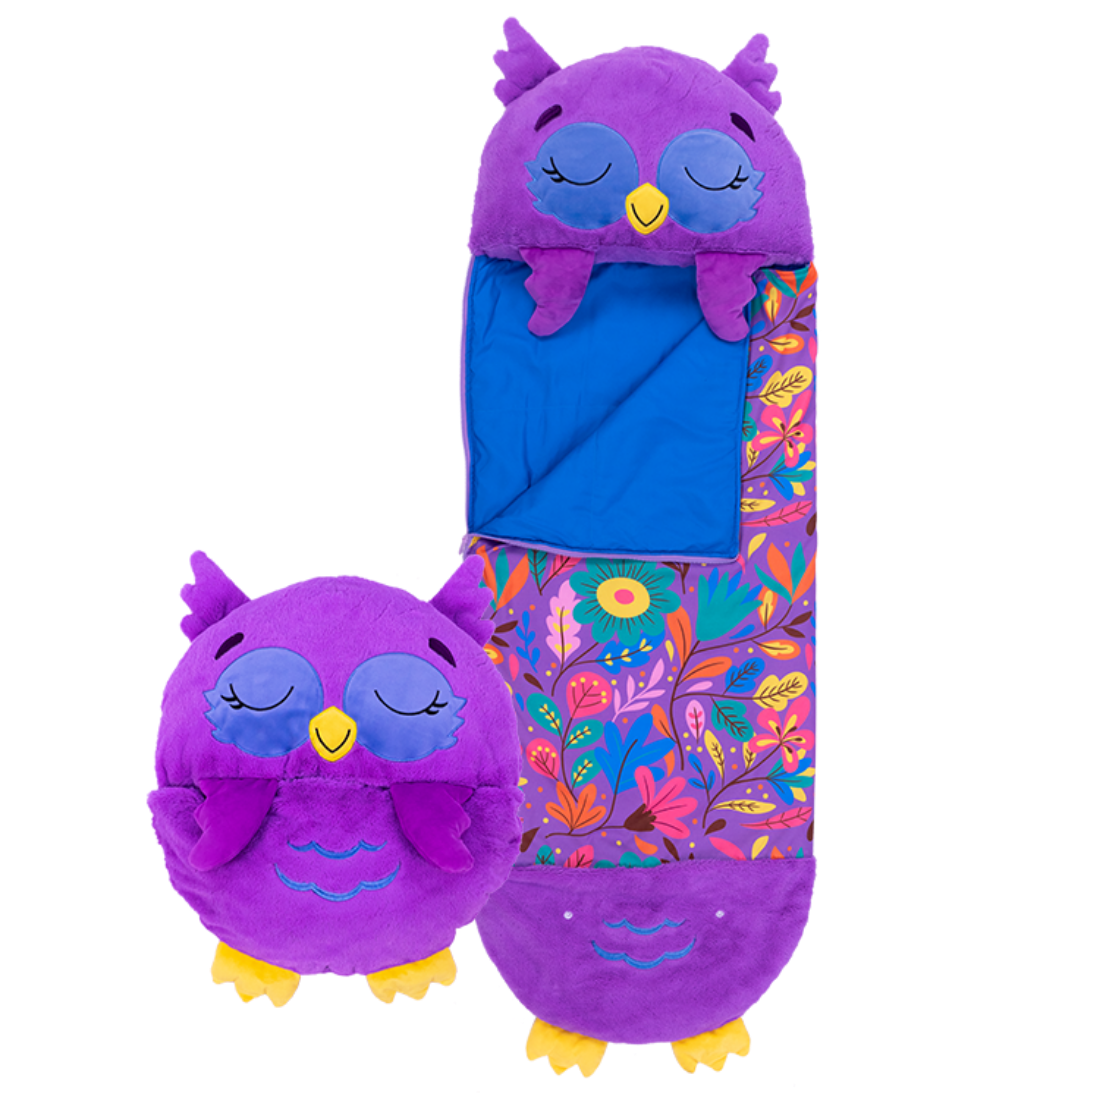 View Happy Nappers Purple Owl Medium Ages 3 To 6 Plush Toy That Opens To A Fun Sleeping Bag High Street TV information